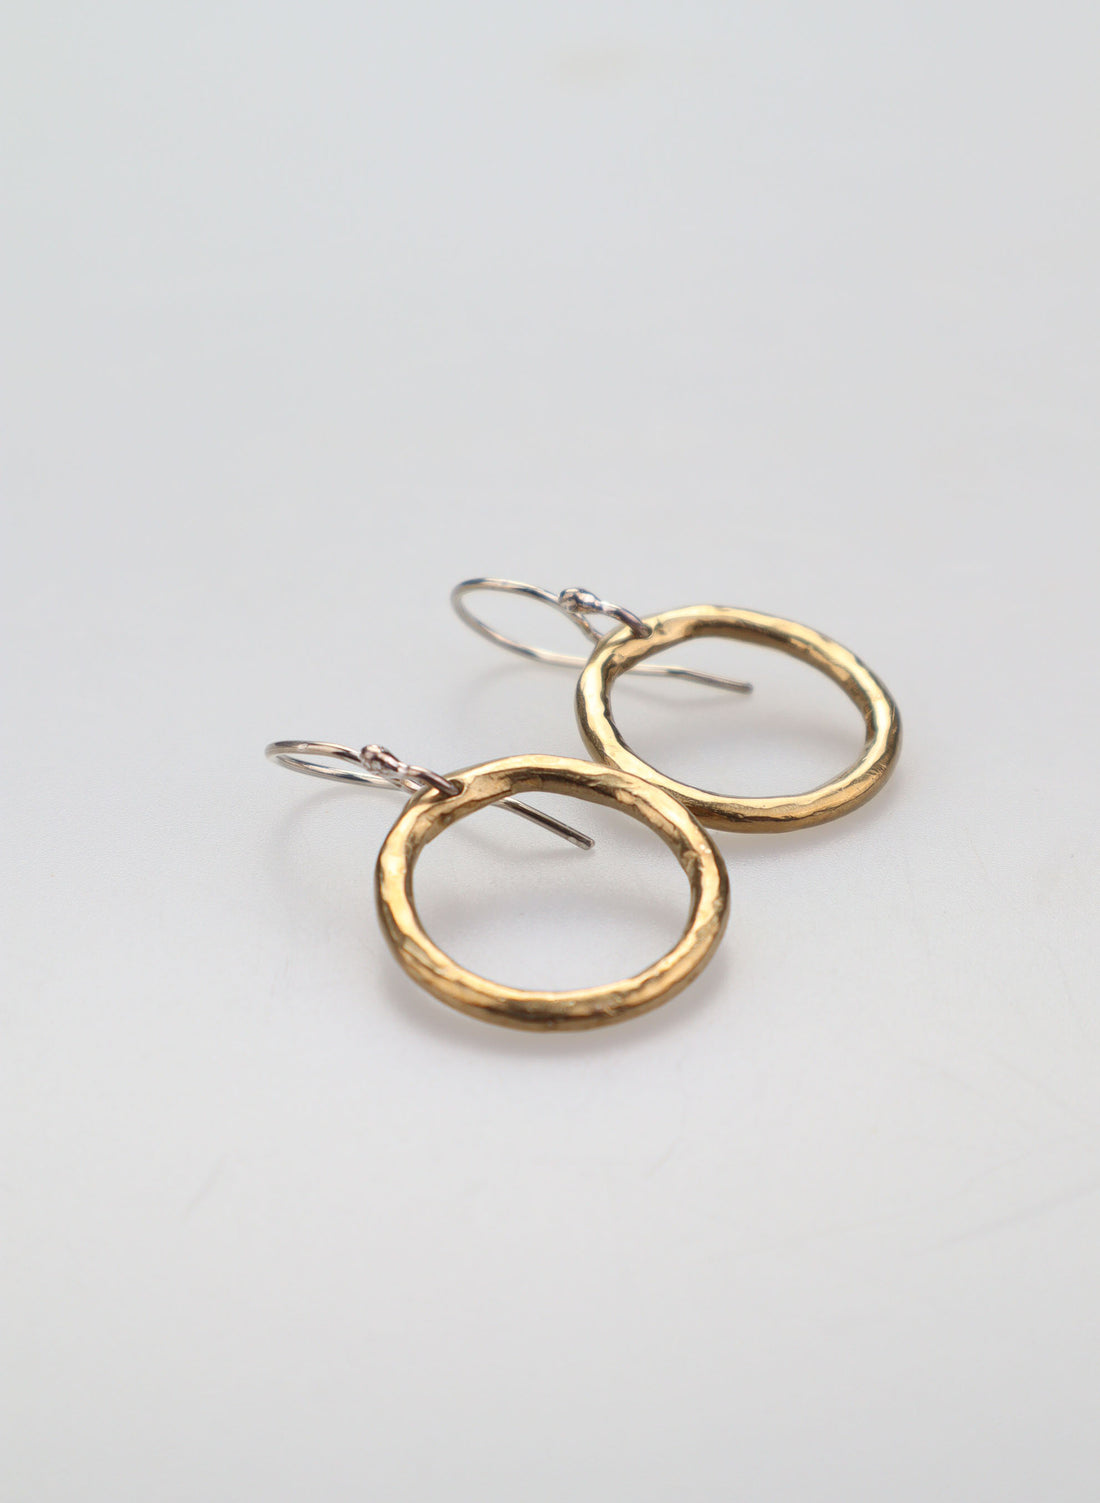 Organic Circle Link Silver and Bronze Earrings